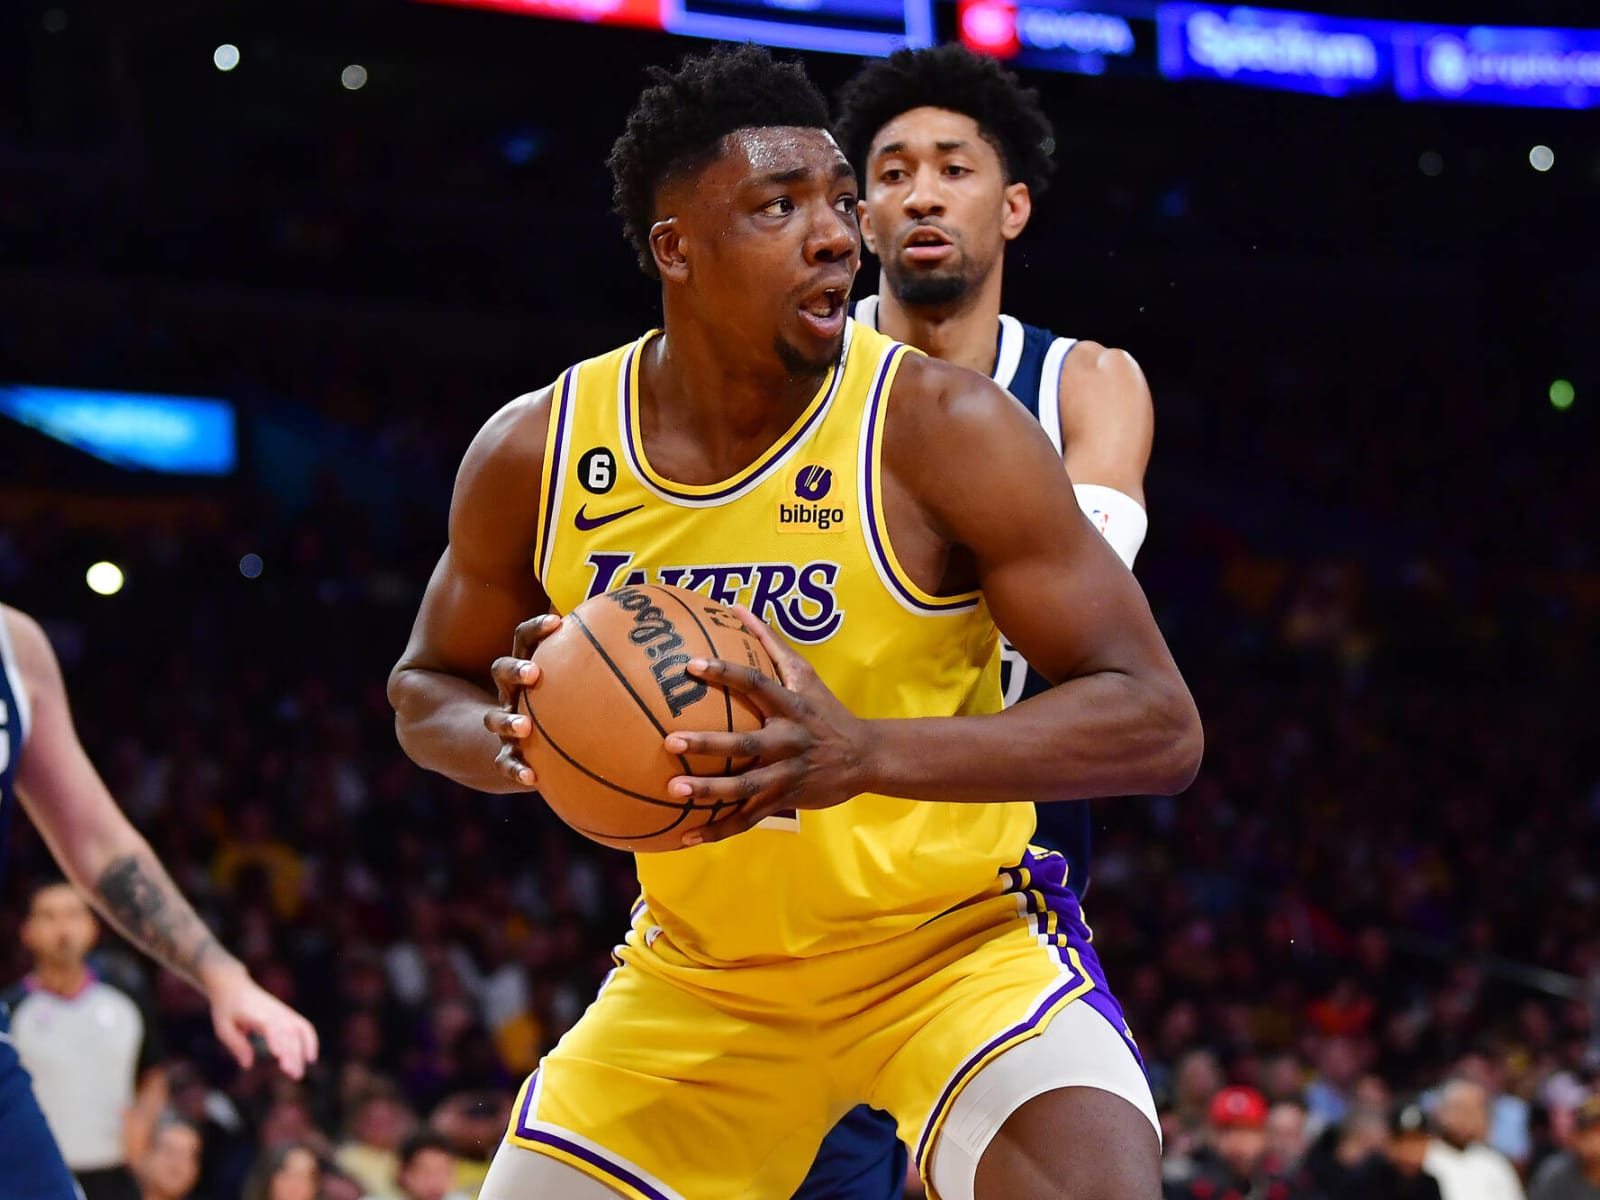 Denver Nuggets trade for Lakers' Thomas Bryant, ESPN reports